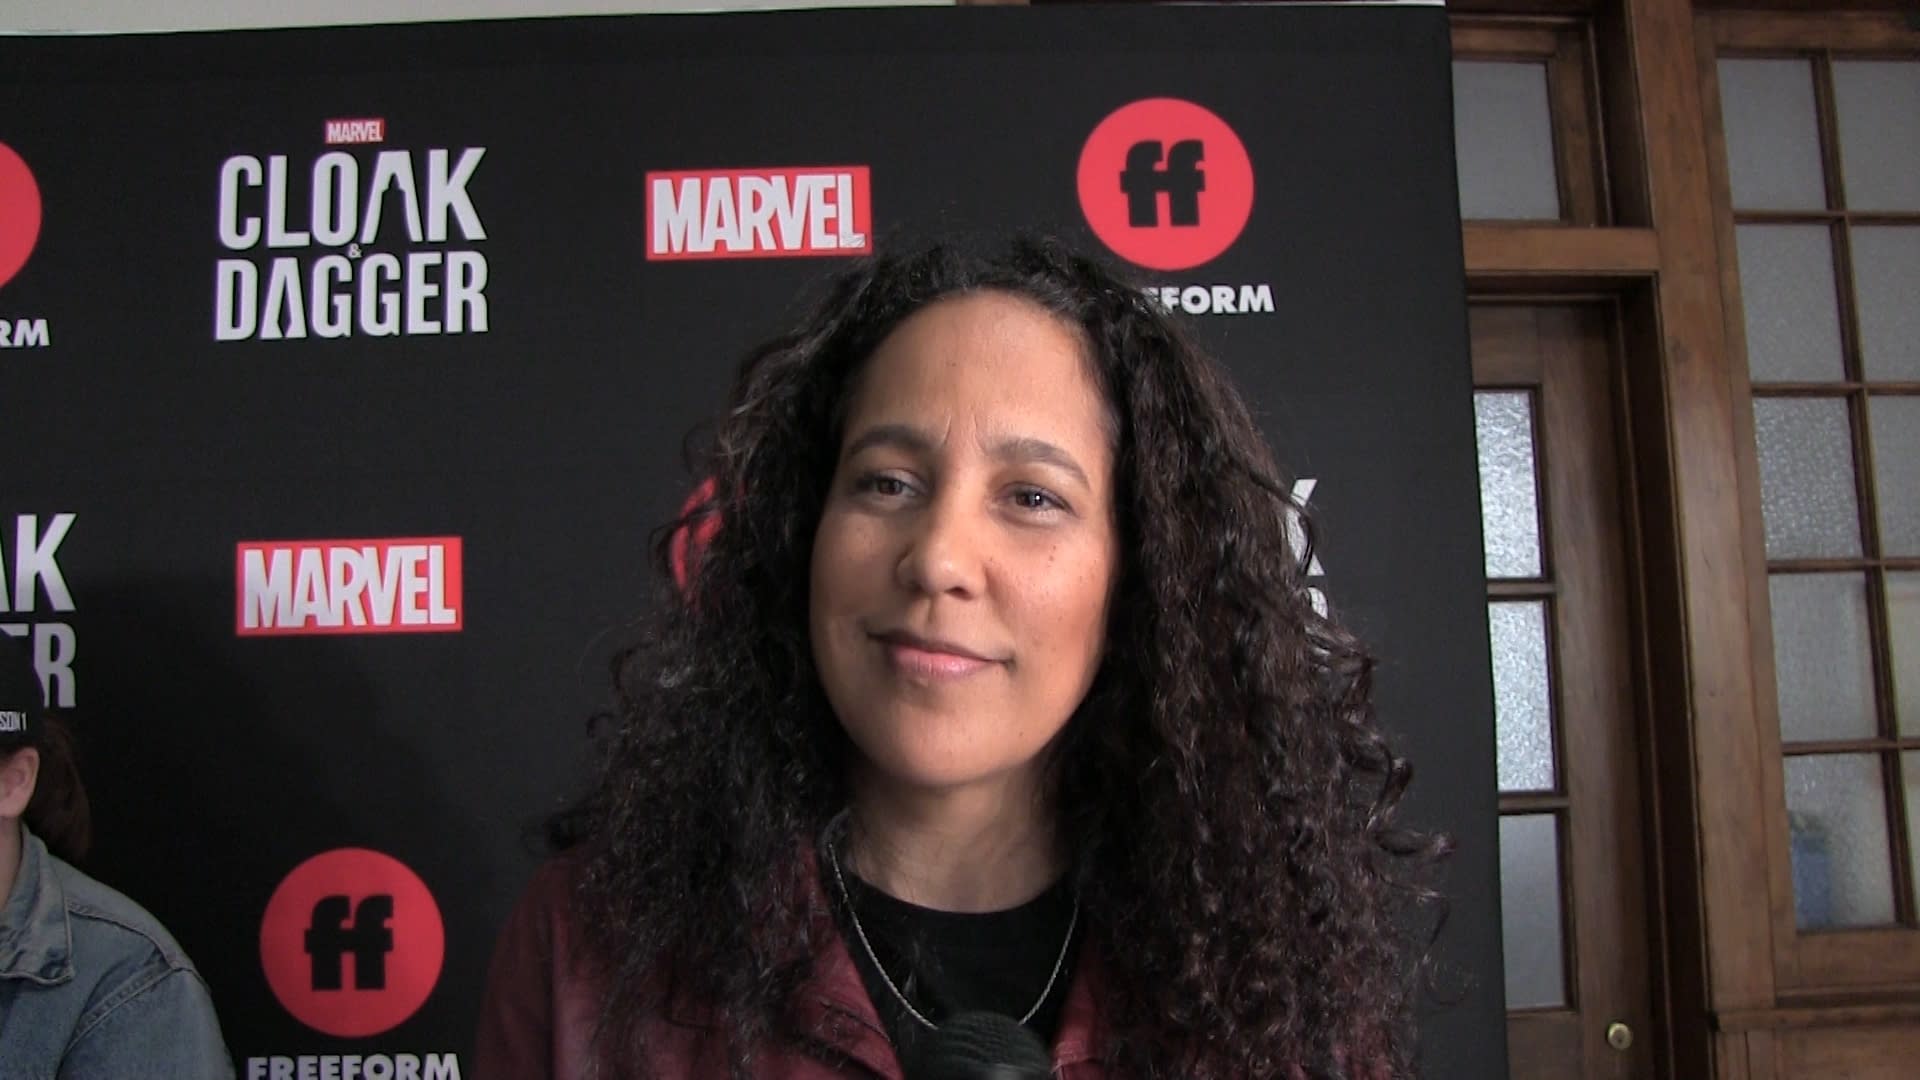 [#SXSW 2018] Cloak and Dagger Red Carpet Interview: Director Gina Prince-Bythewood Loves Marvel